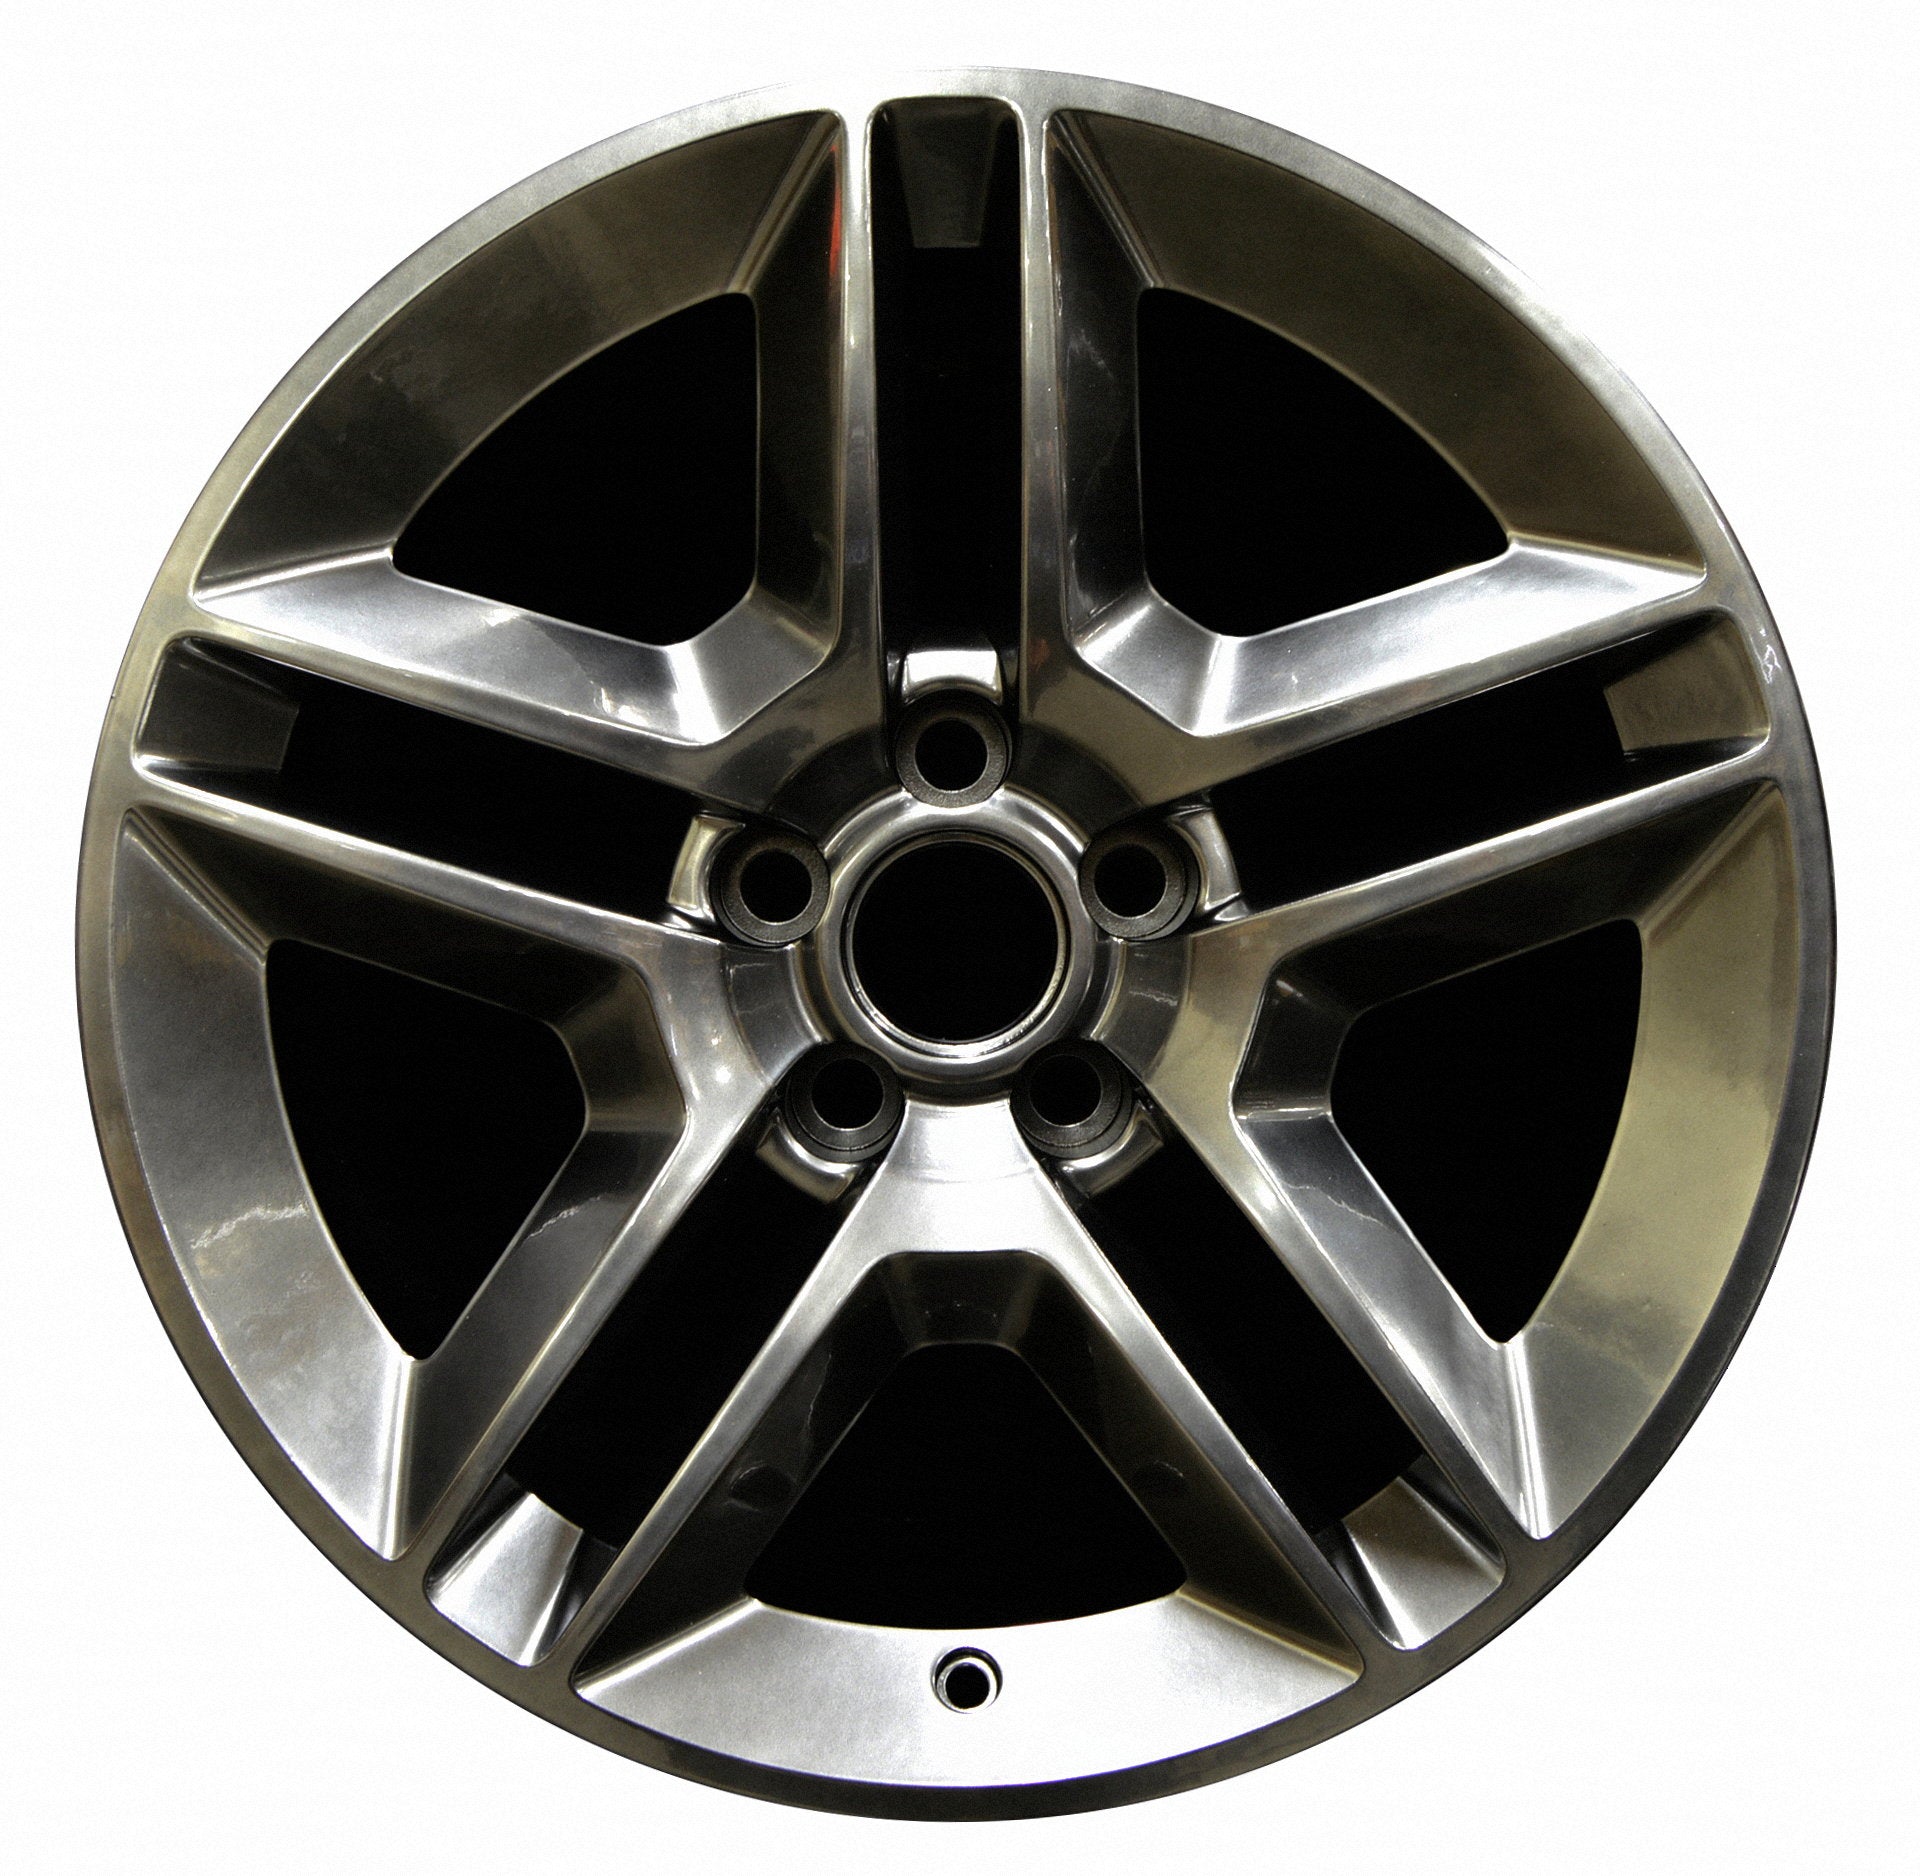 Ford Mustang  2010, 2011, 2012 Factory OEM Car Wheel Size 19x9.5 Alloy WAO.3814RE.HYPV3.FF